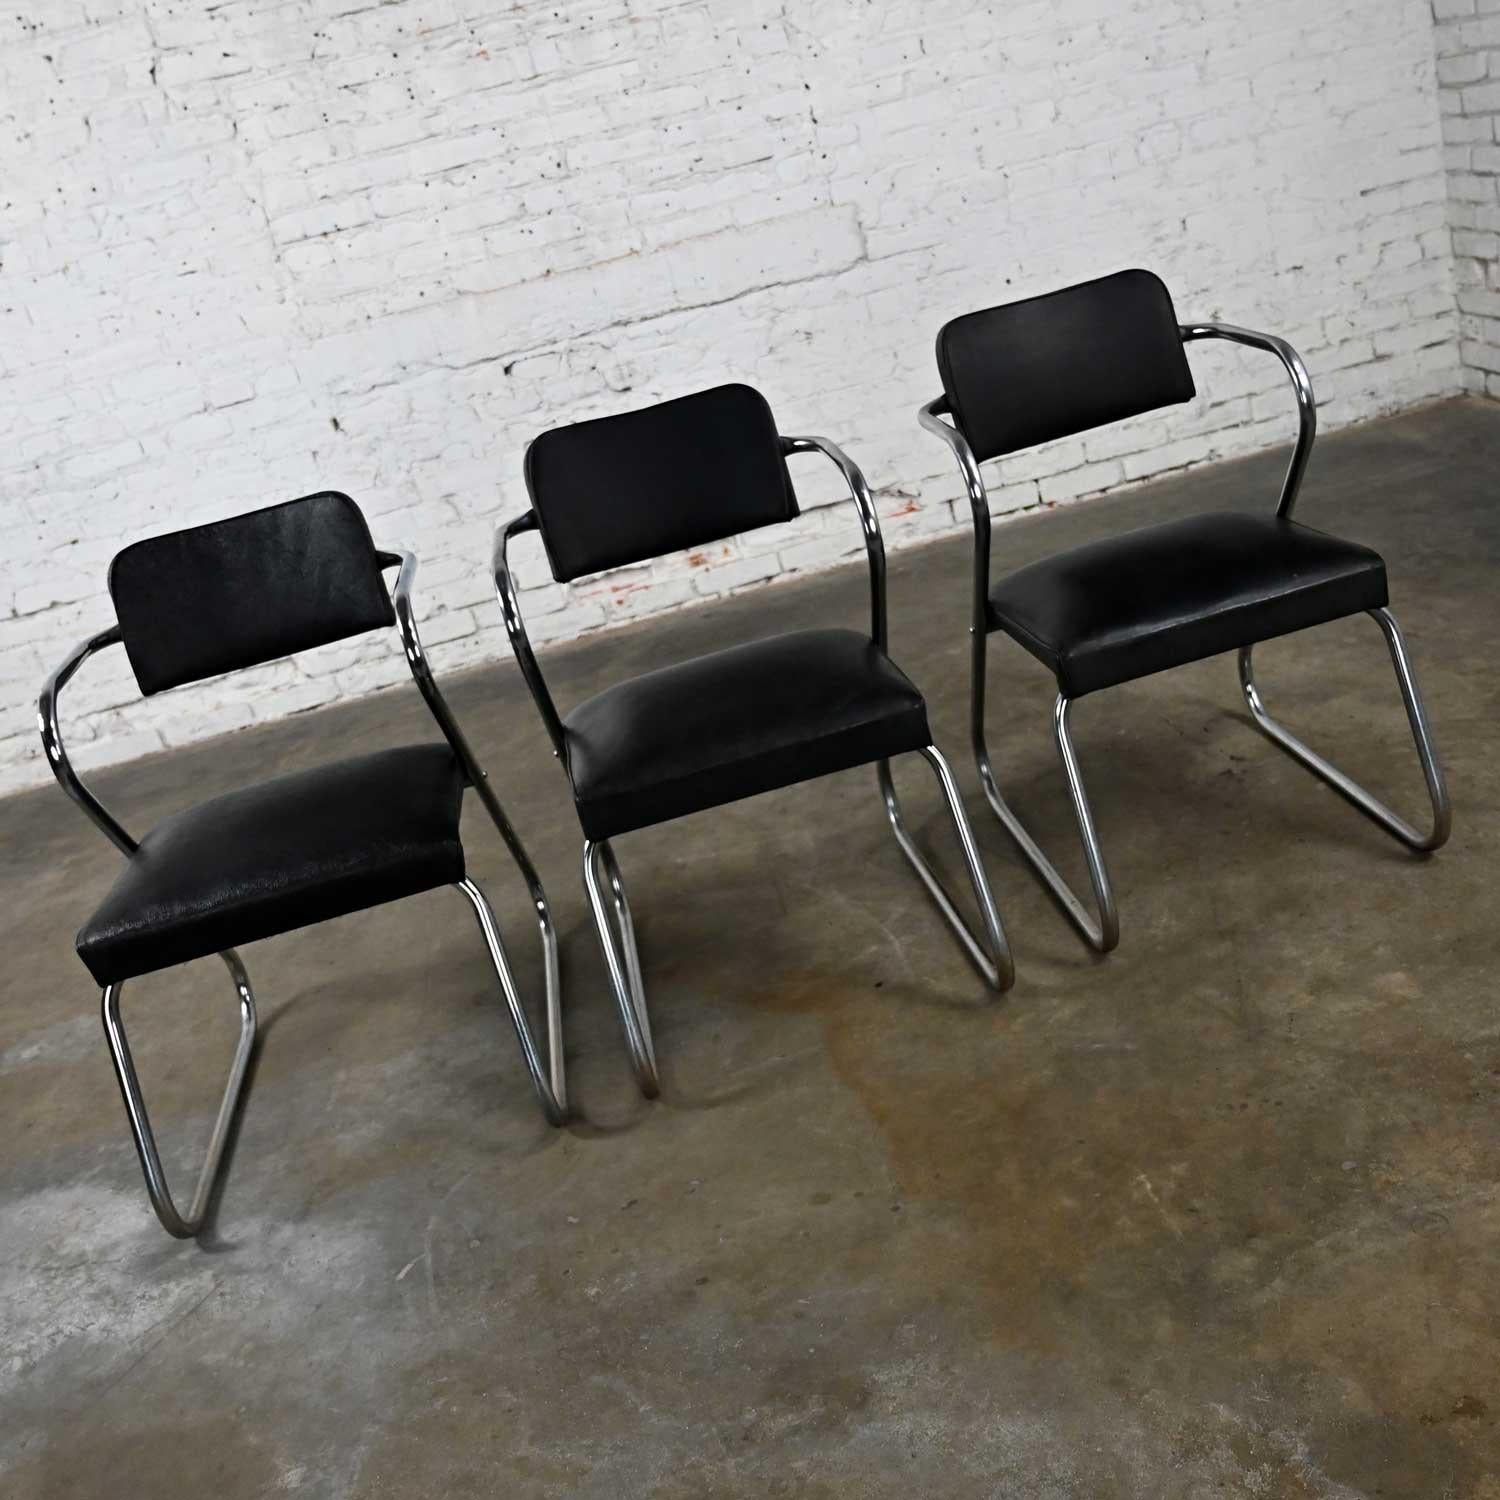 Fantastic vintage Art Deco set of 3 chrome tube and original black vinyl or faux leather chairs attributed to Kem Weber Z Chair. Beautiful condition, keeping in mind that these are vintage and not new so will have signs of use and wear. The frames